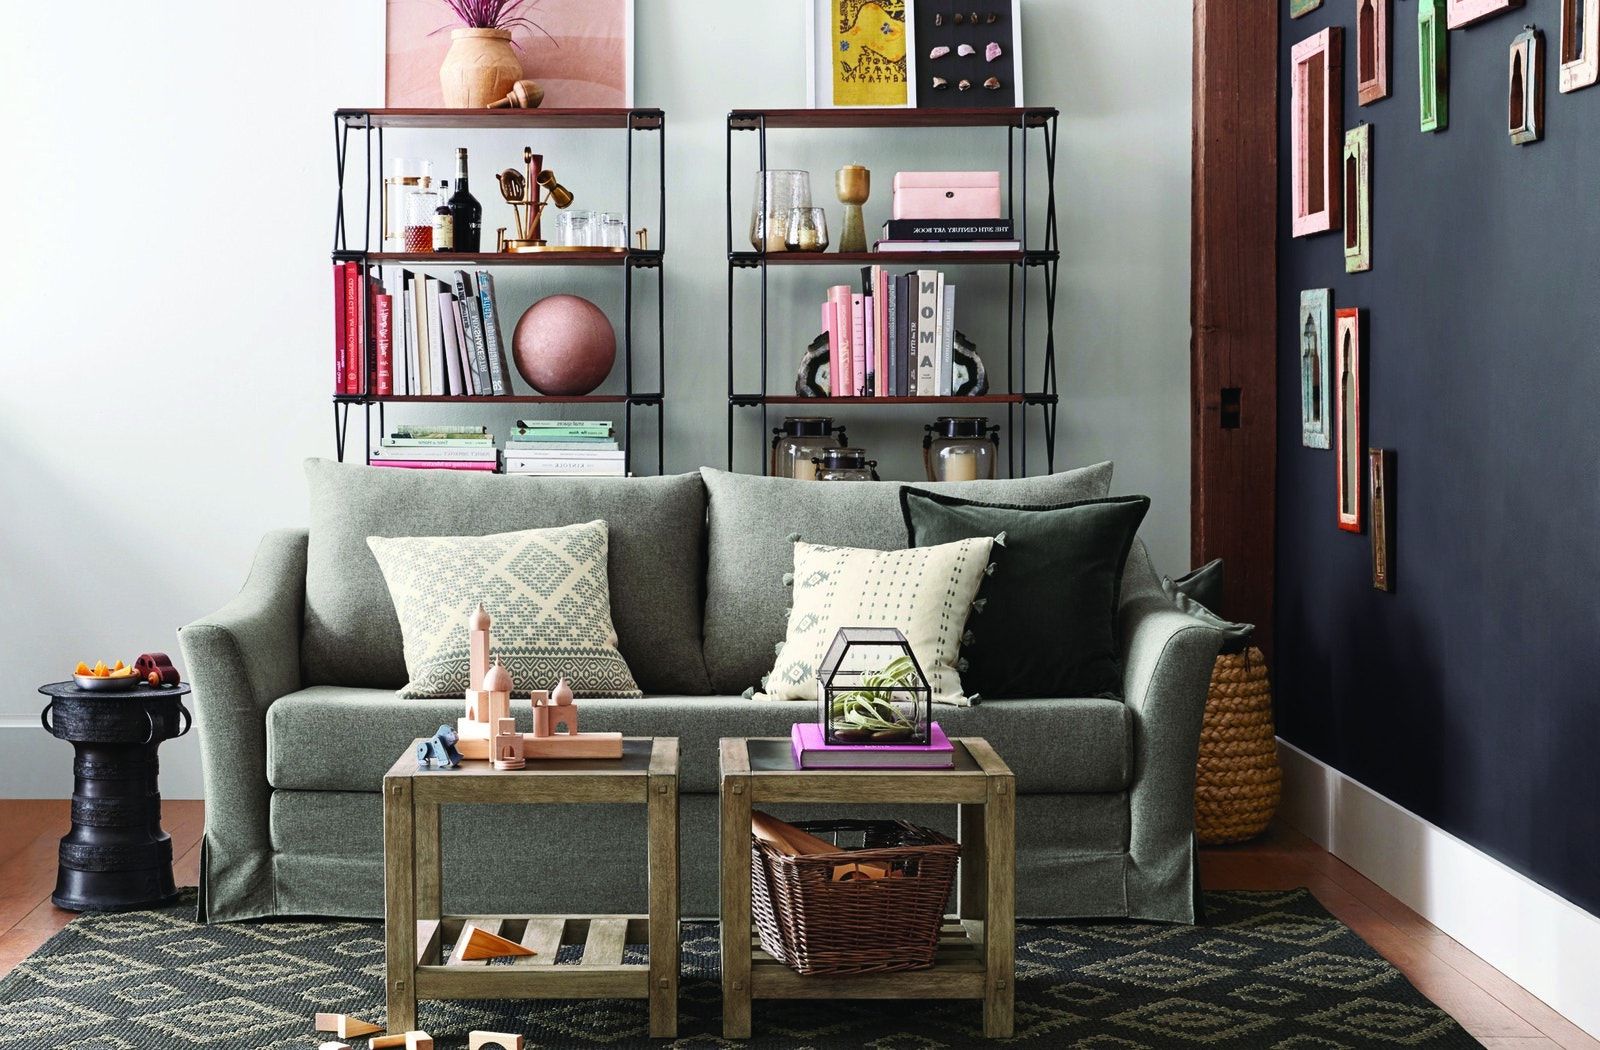 Pottery Barn's New Small Space Line (View 24 of 25)